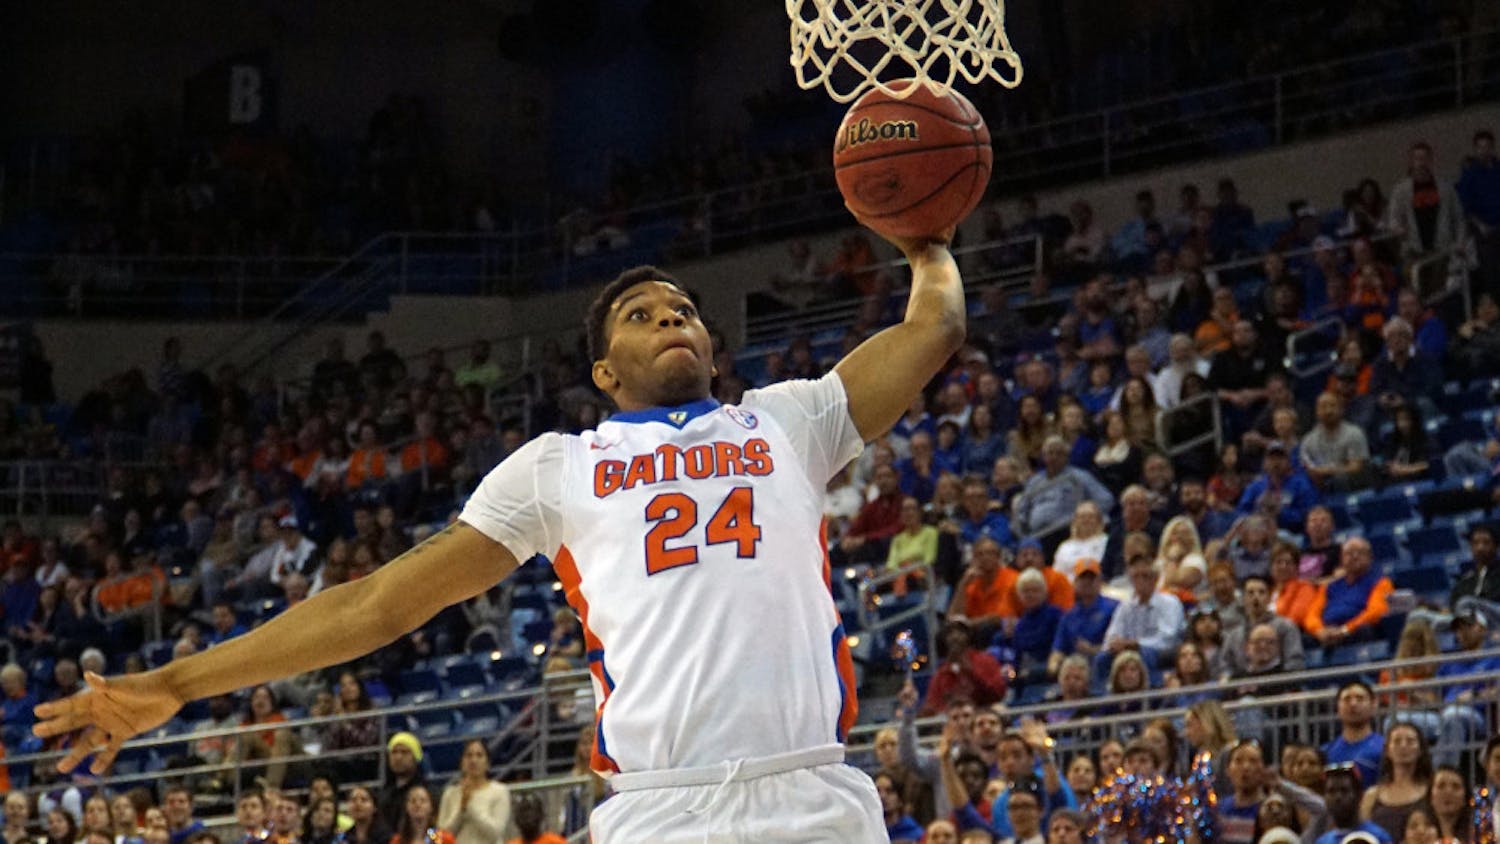 UF’s Justin Leon soars for a dunk during Florida’s 95-63 win against Auburn on Jan. 23, 2016, in the O’Connell Center.